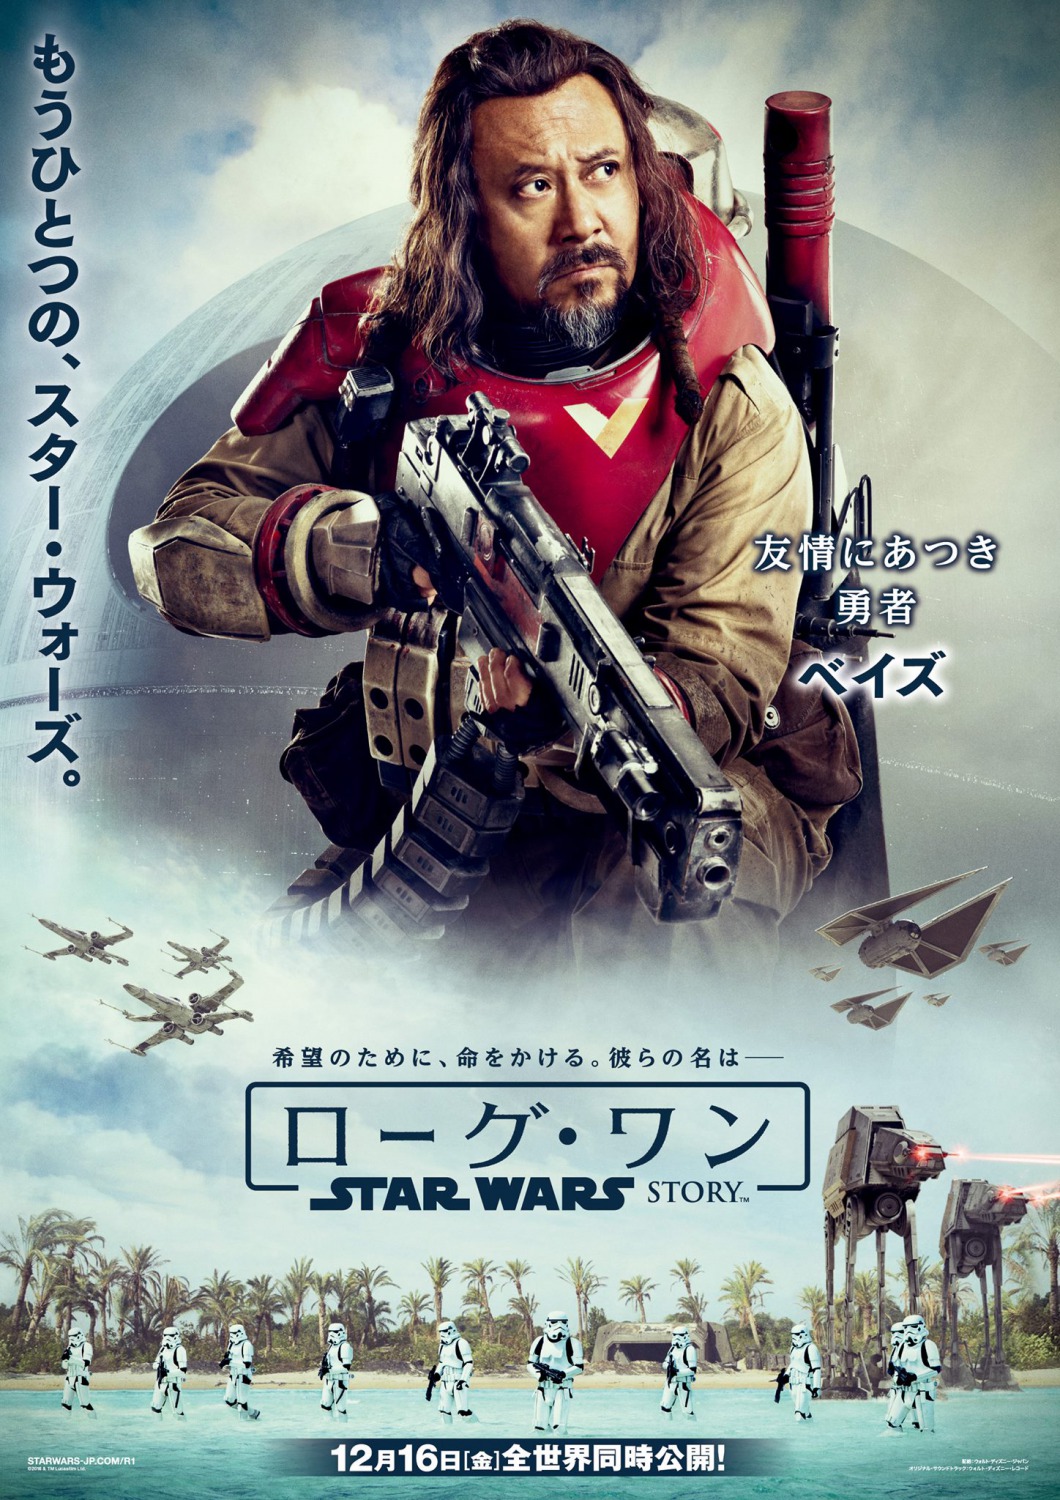 Online Film 2016 Rogue One: A Star Wars Story Watch